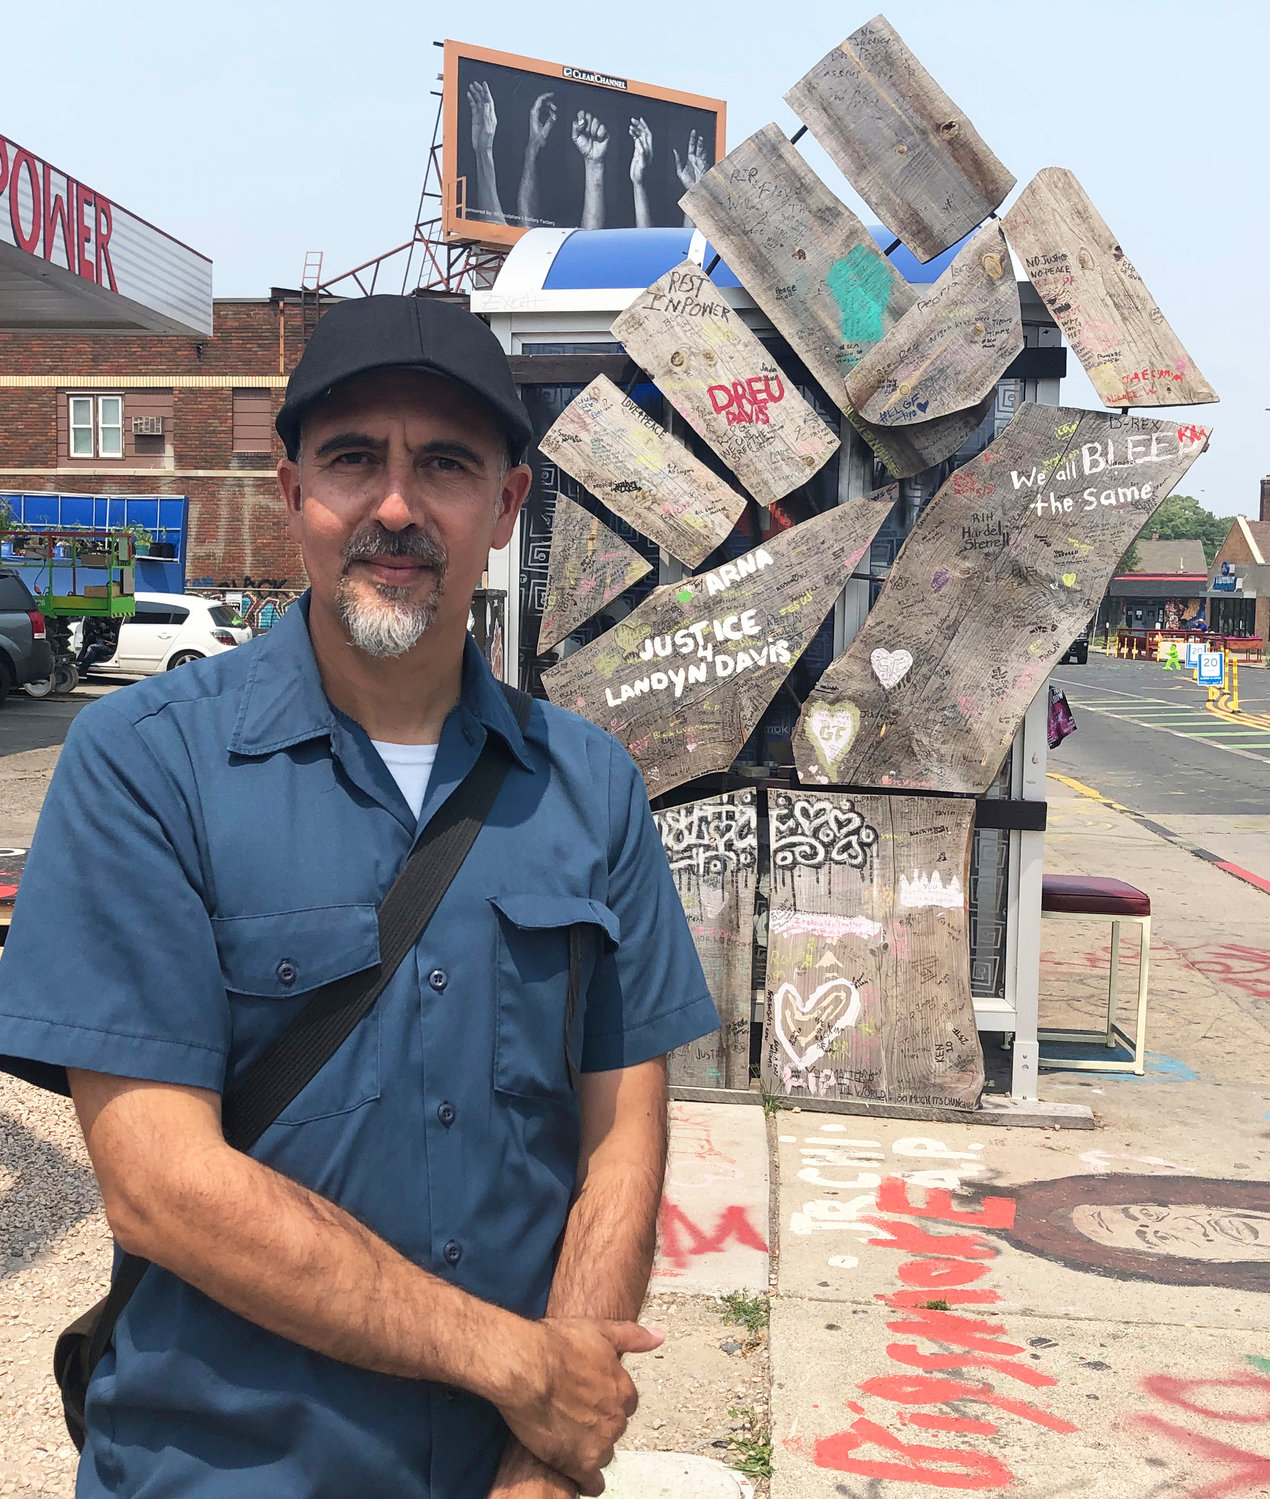 Xavier Tavera at a wooden fist sculpture at George Floyd Square, his billboard “Unified” visible in the background. (Photo by Jill Boogren)